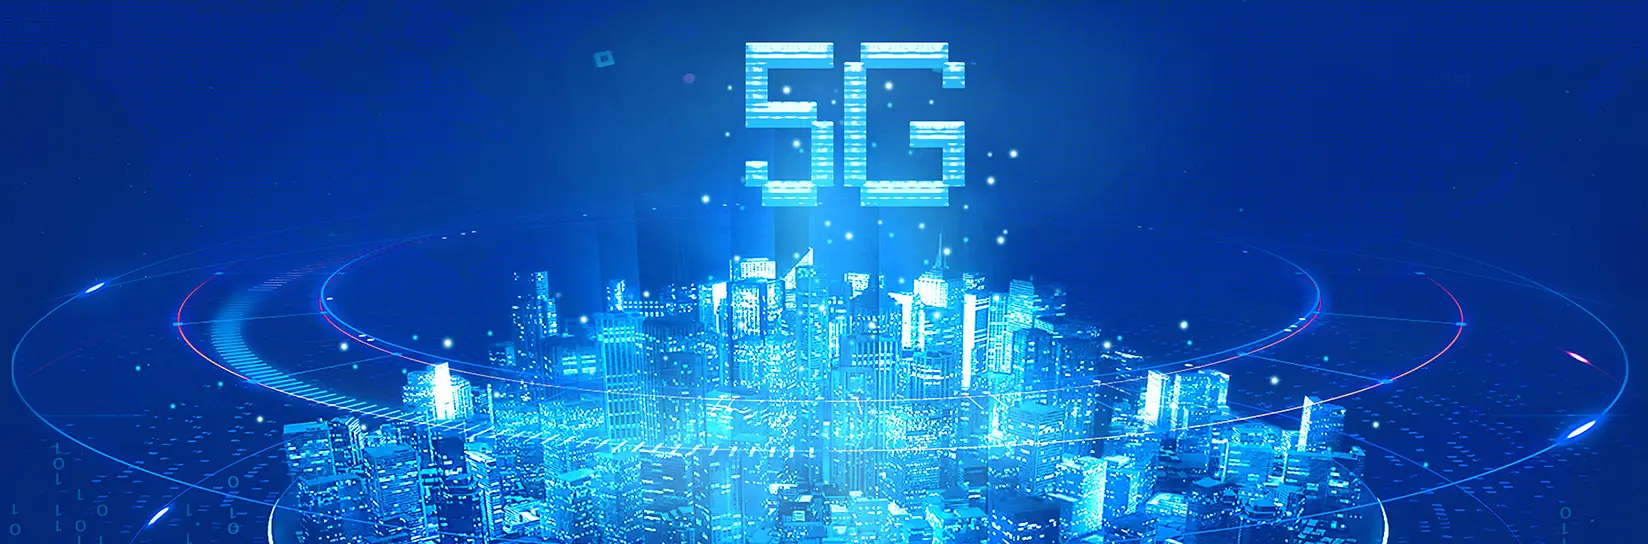 Predictions about the number of future 5G connections